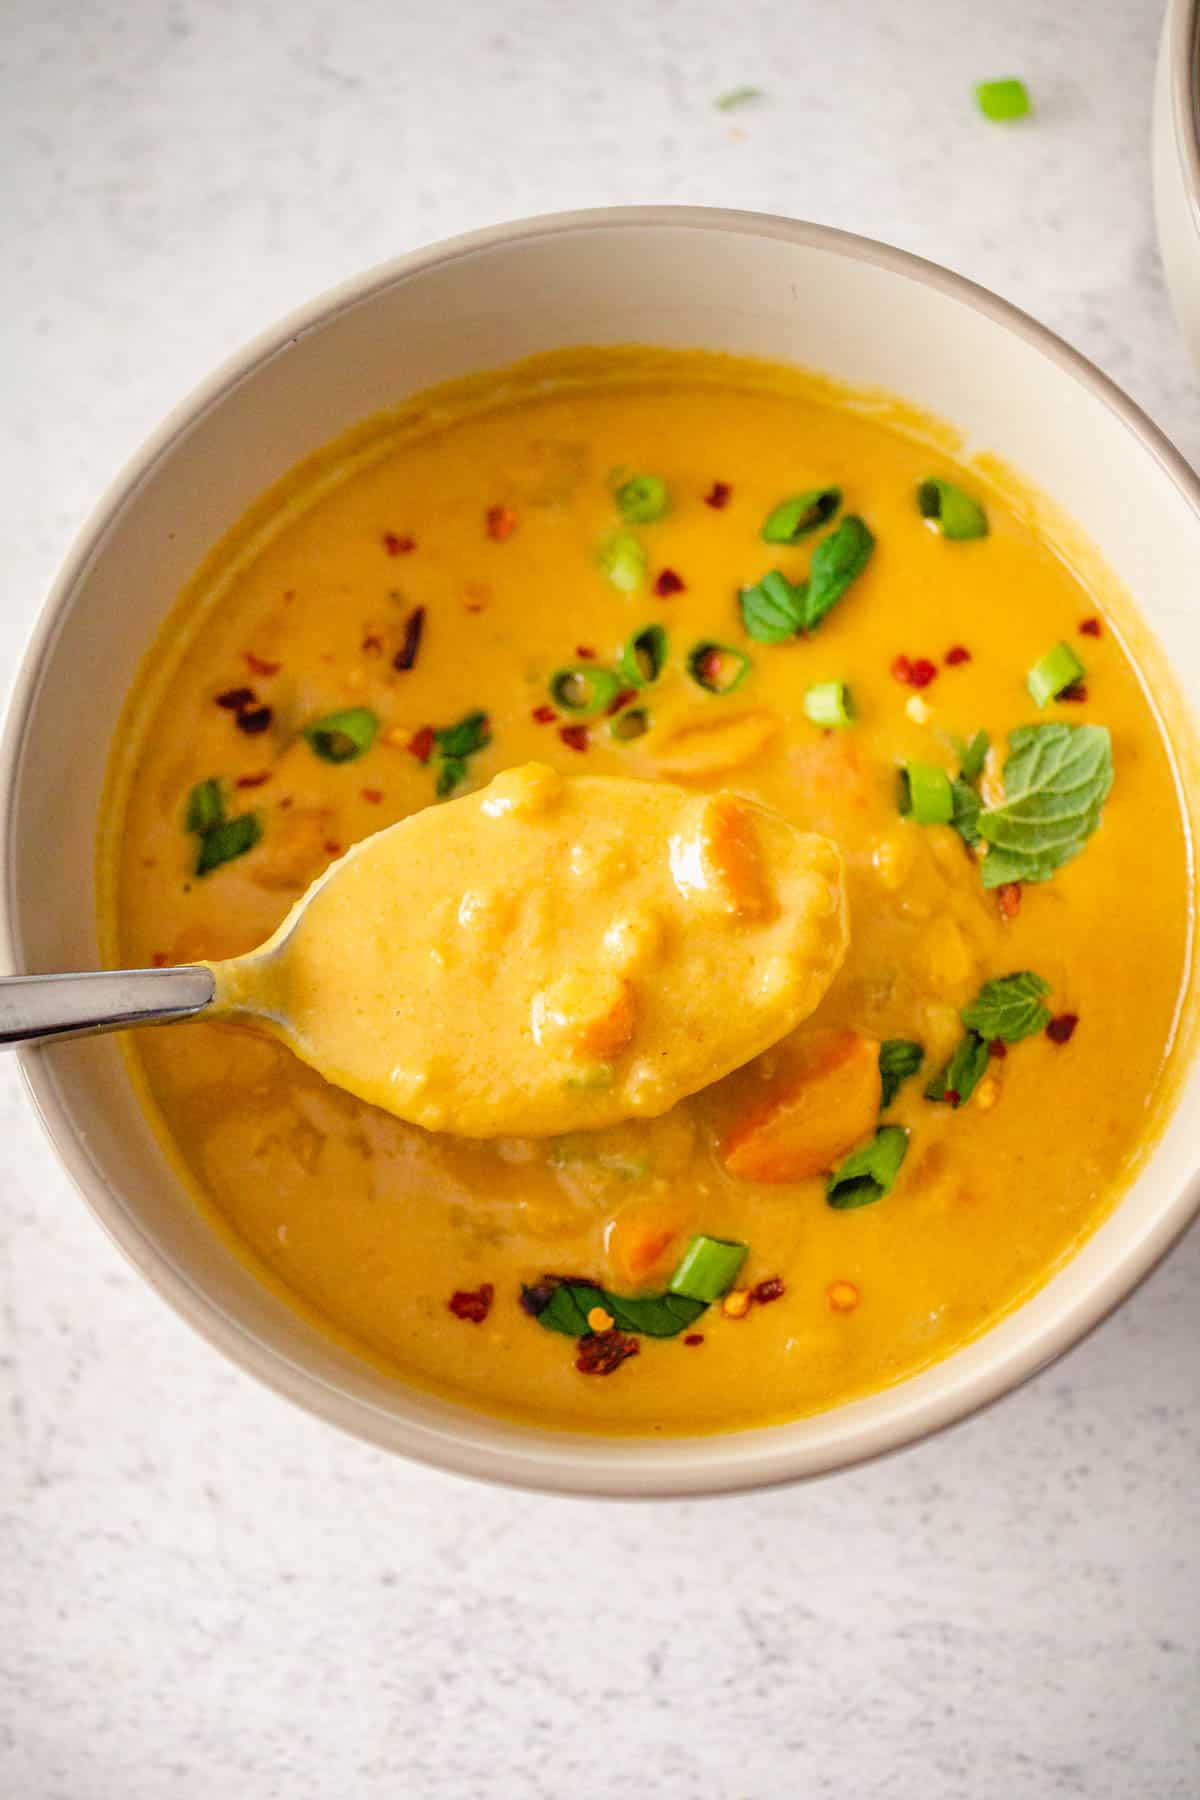 Spoonful of Creamy Spiced Carrot and Lentil Soup